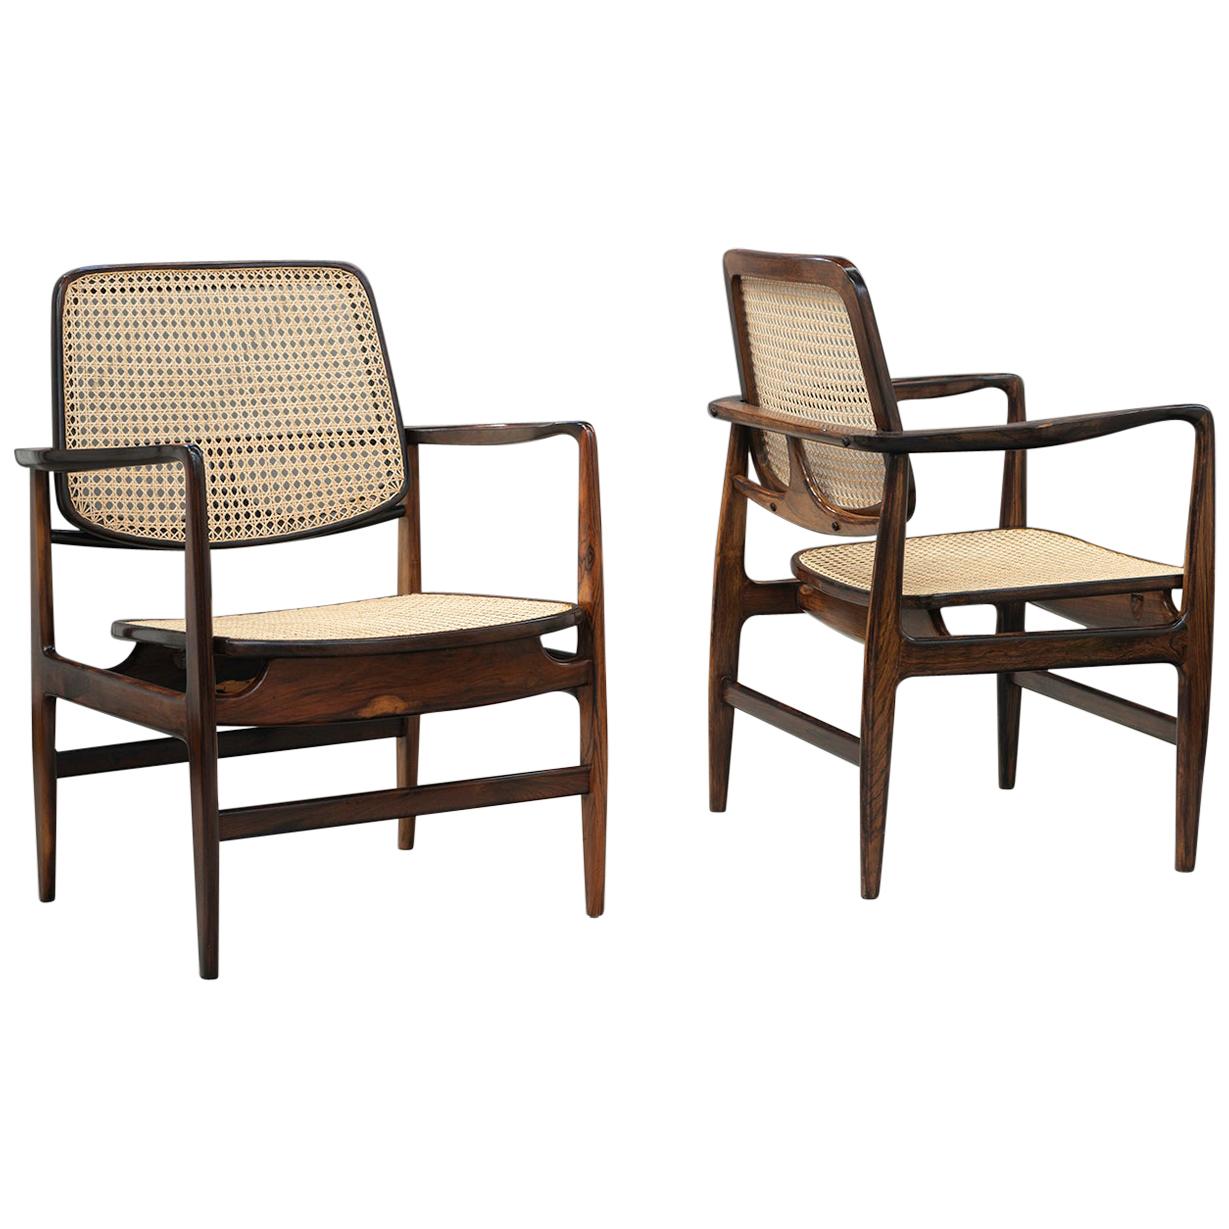 Pair of "Oscar" Armchairs by Sergio Rodrigues, Brazilian Midcentury Design